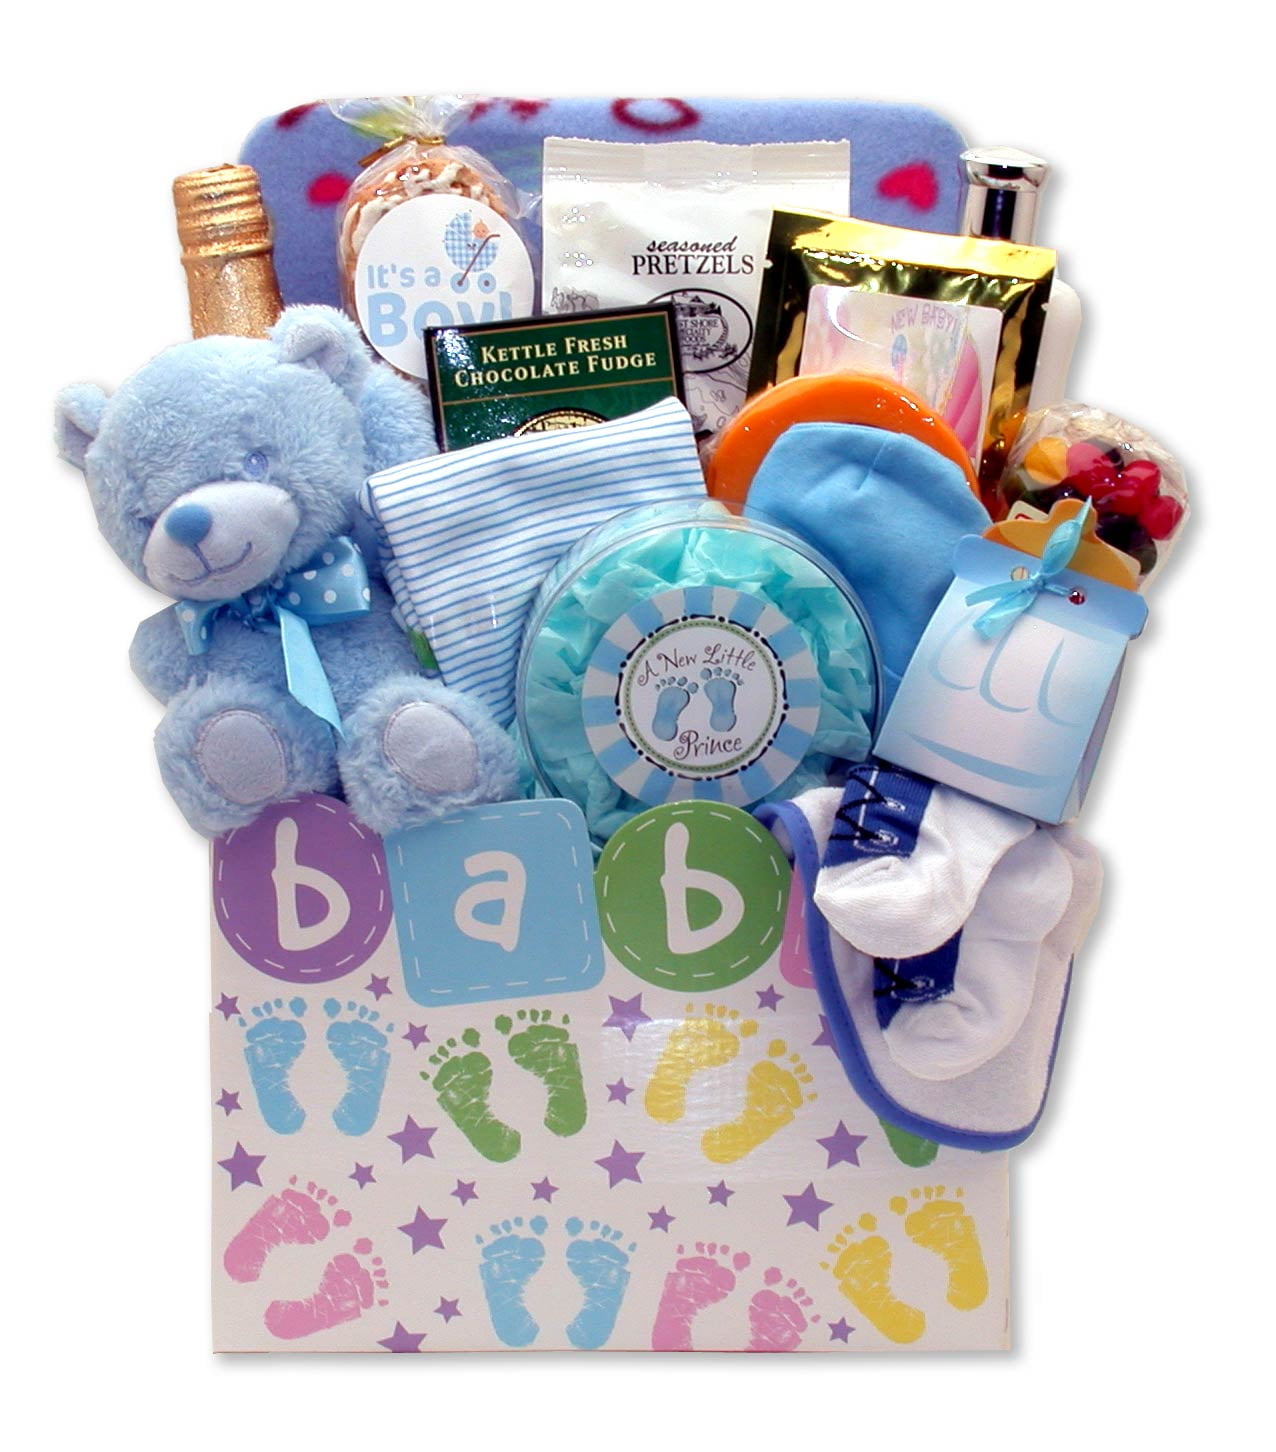 New Baby Gift Set for Newborn Boy – 2 Blue Keepsake Boxes with Baby  Clothes, Teddy Bear and Newborn Essentials - New Baby Gift Basket for  Parents